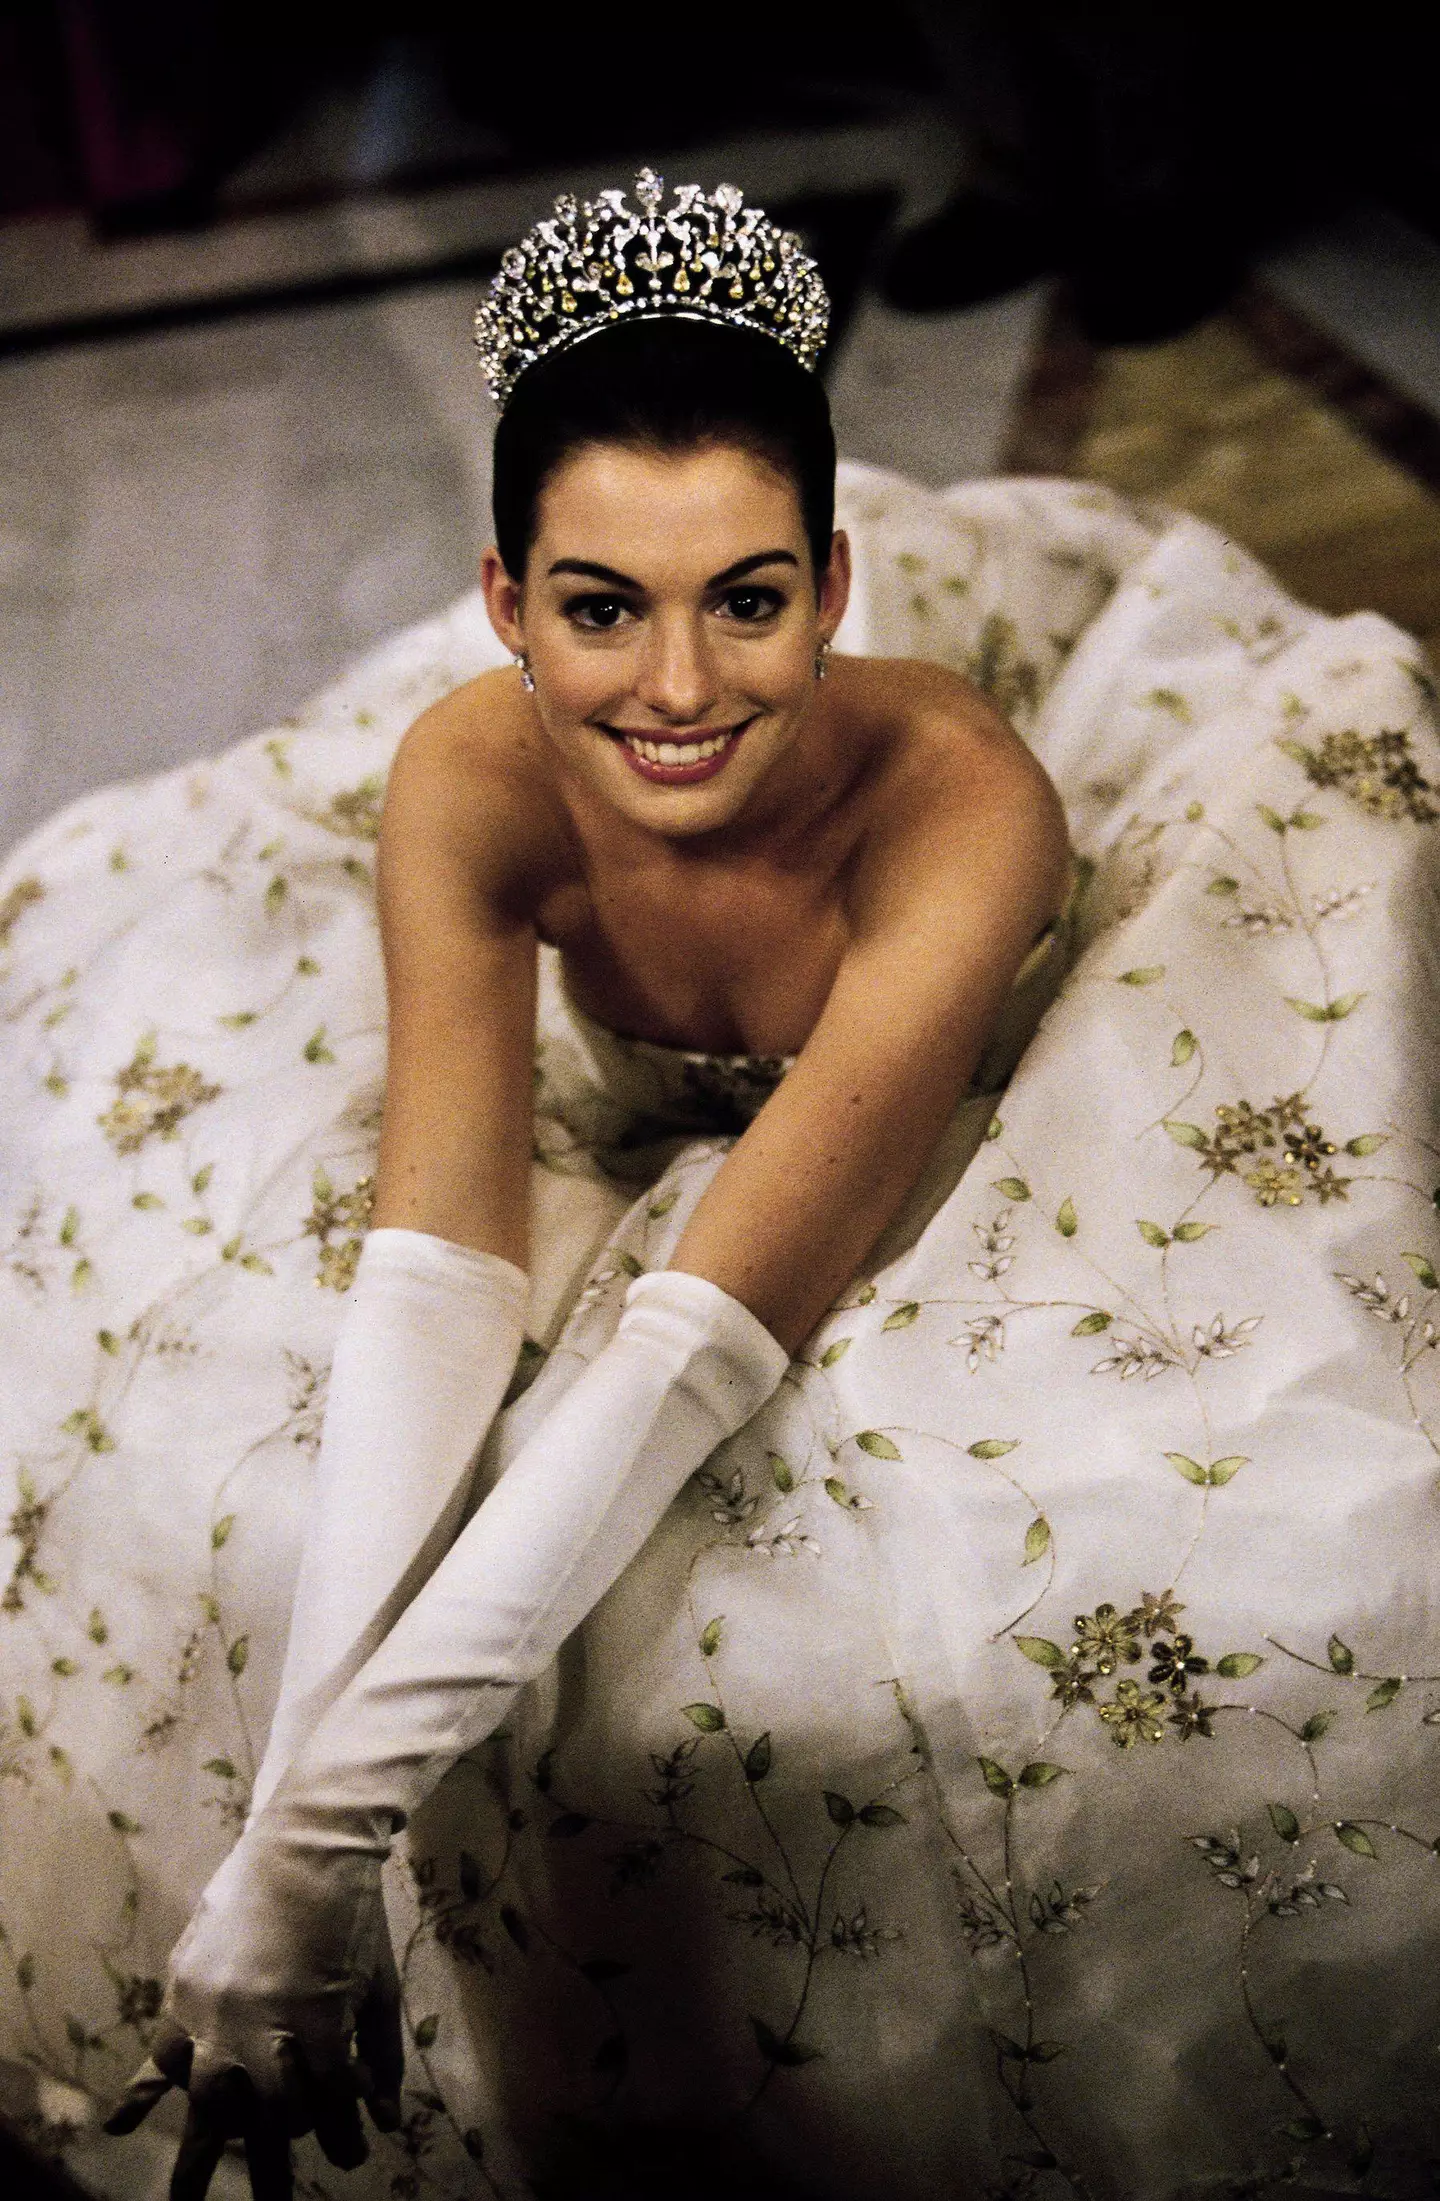 She first shot to fame in the Princess Diaries (